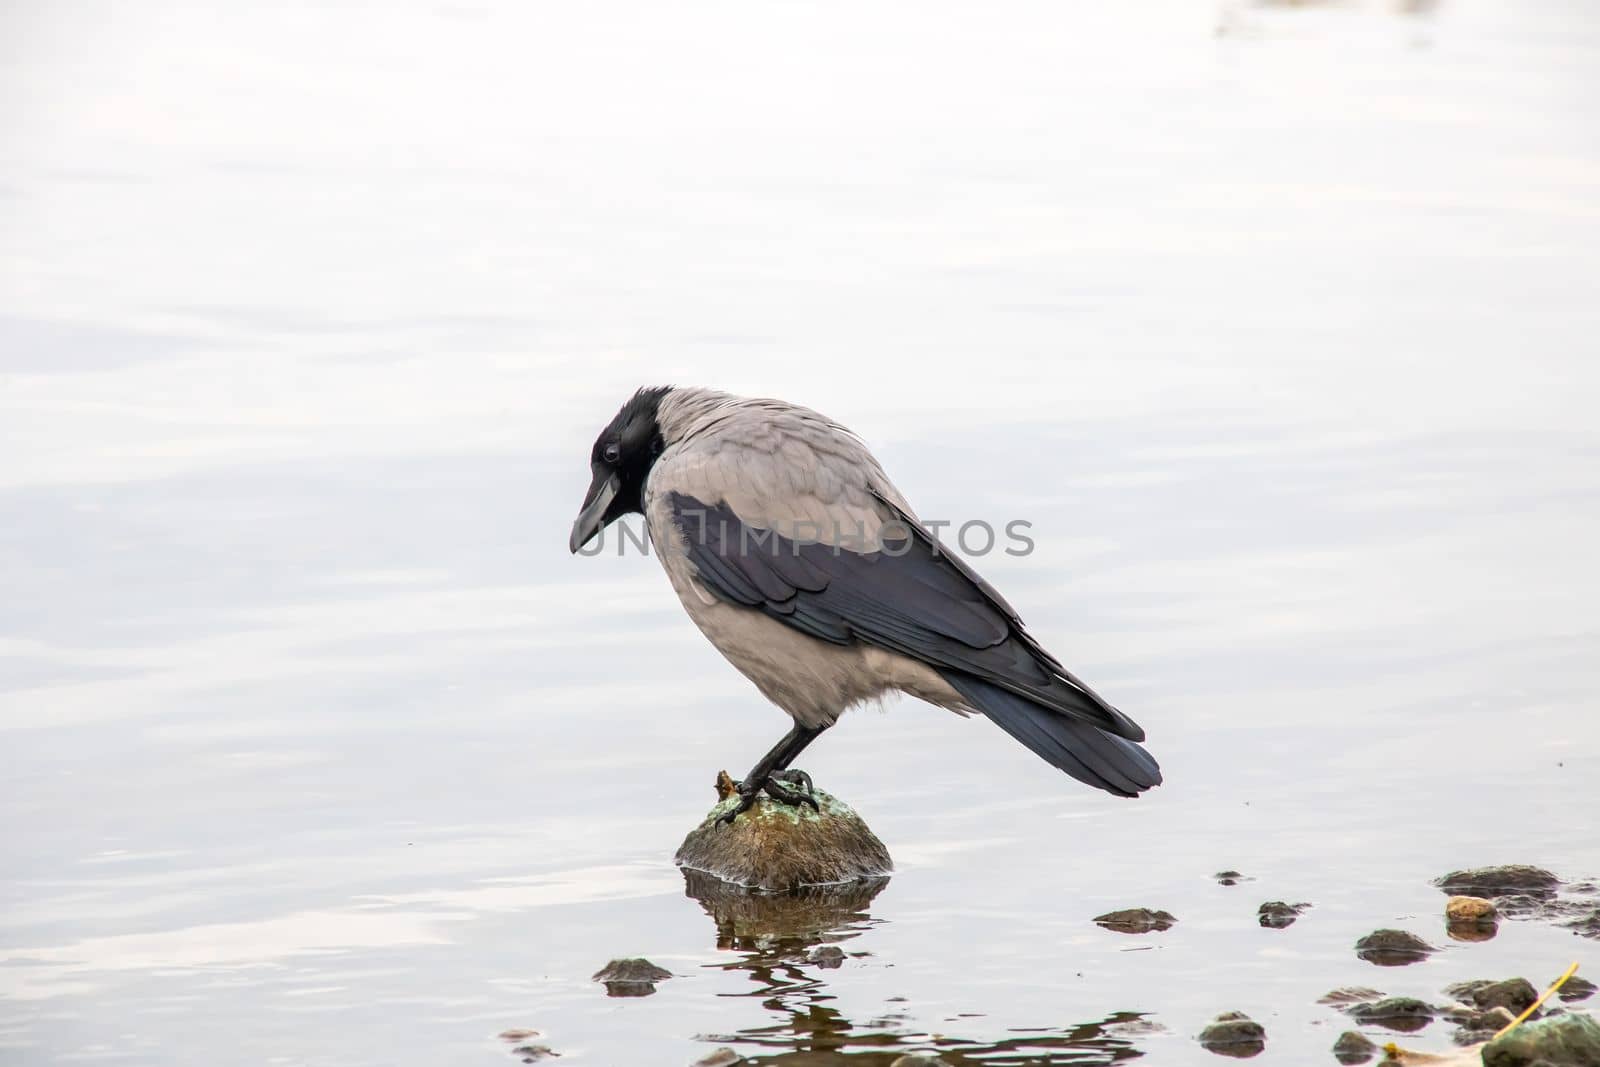 A crow stands on a rock in the water close up